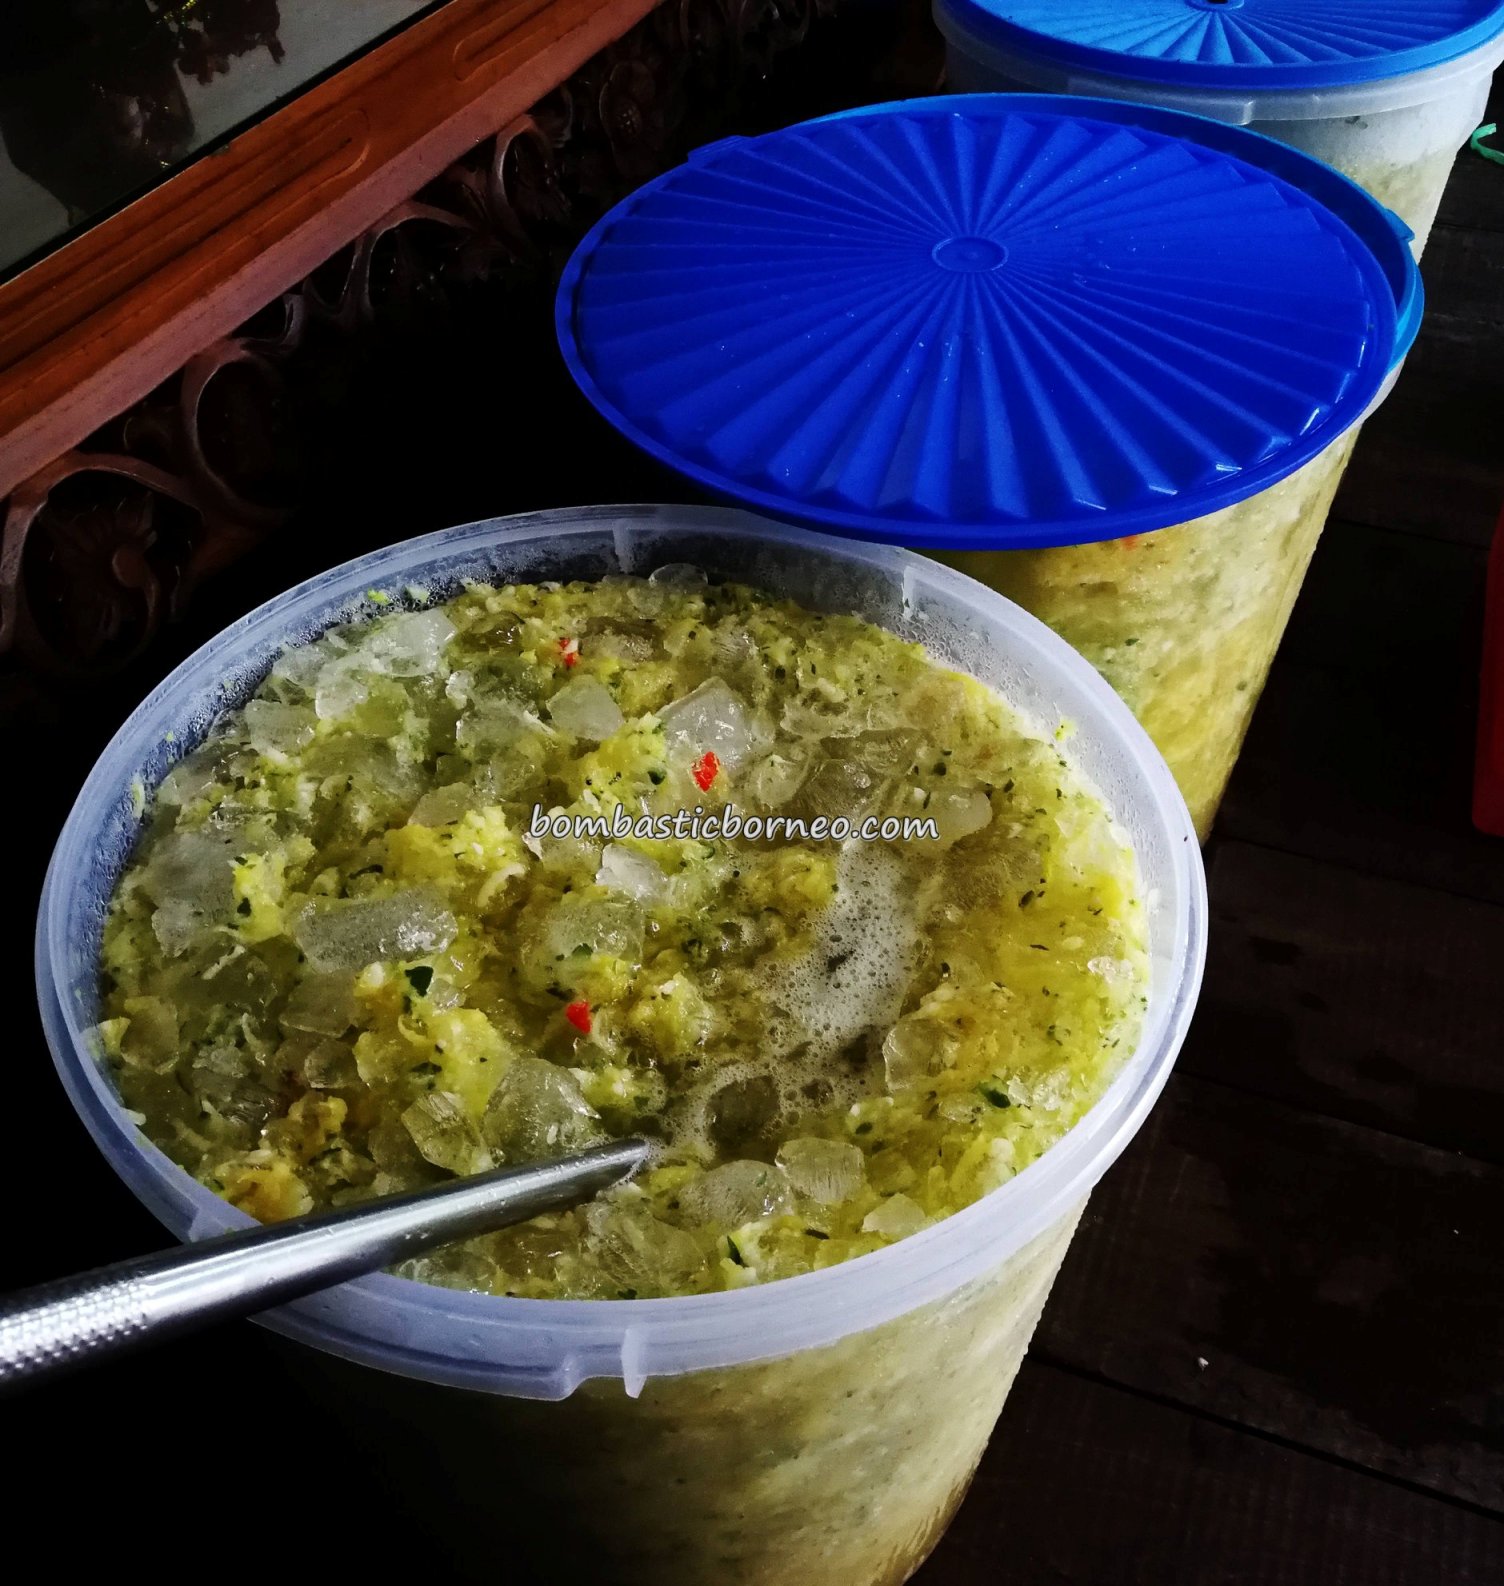 fruits salad, authentic, traditional, backpackers, Dayak Melayik, native, malay village, floating house, Borneo, Kalimantan Barat, Tourism, tourist attraction, town, travel guide, 印尼西加里曼丹,